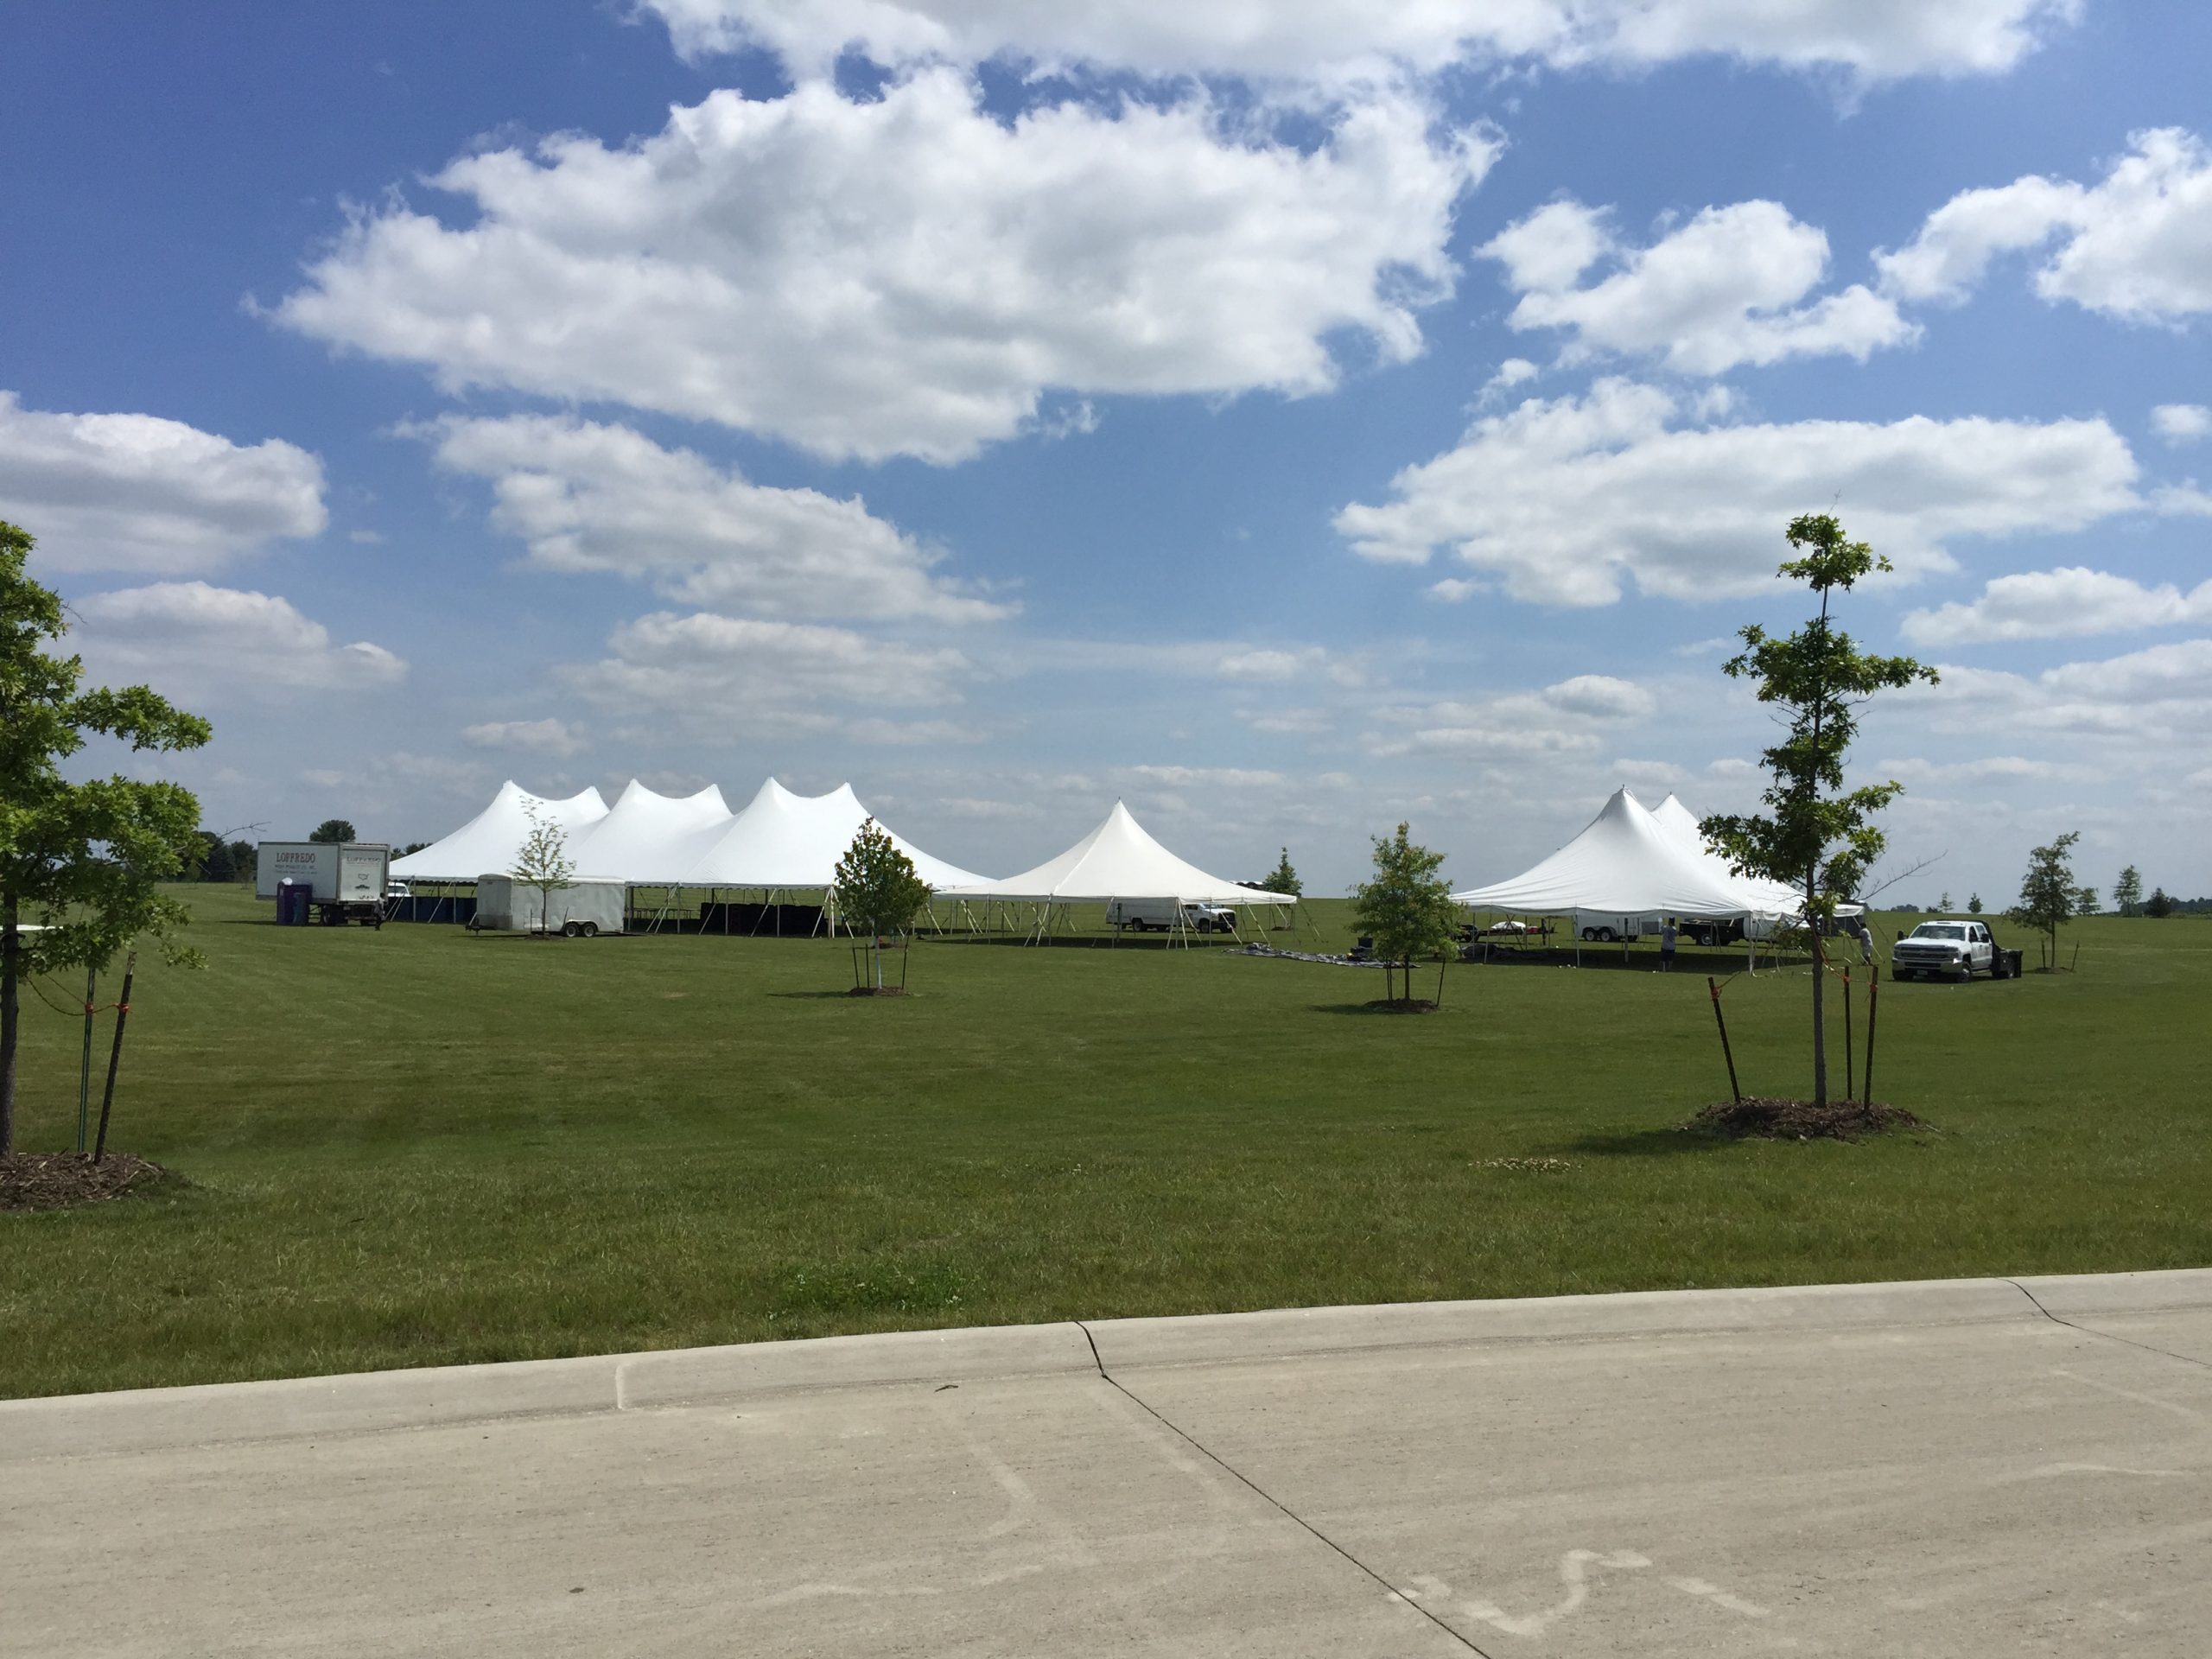 Outdoor festival tent set-up for Blues and BBQ